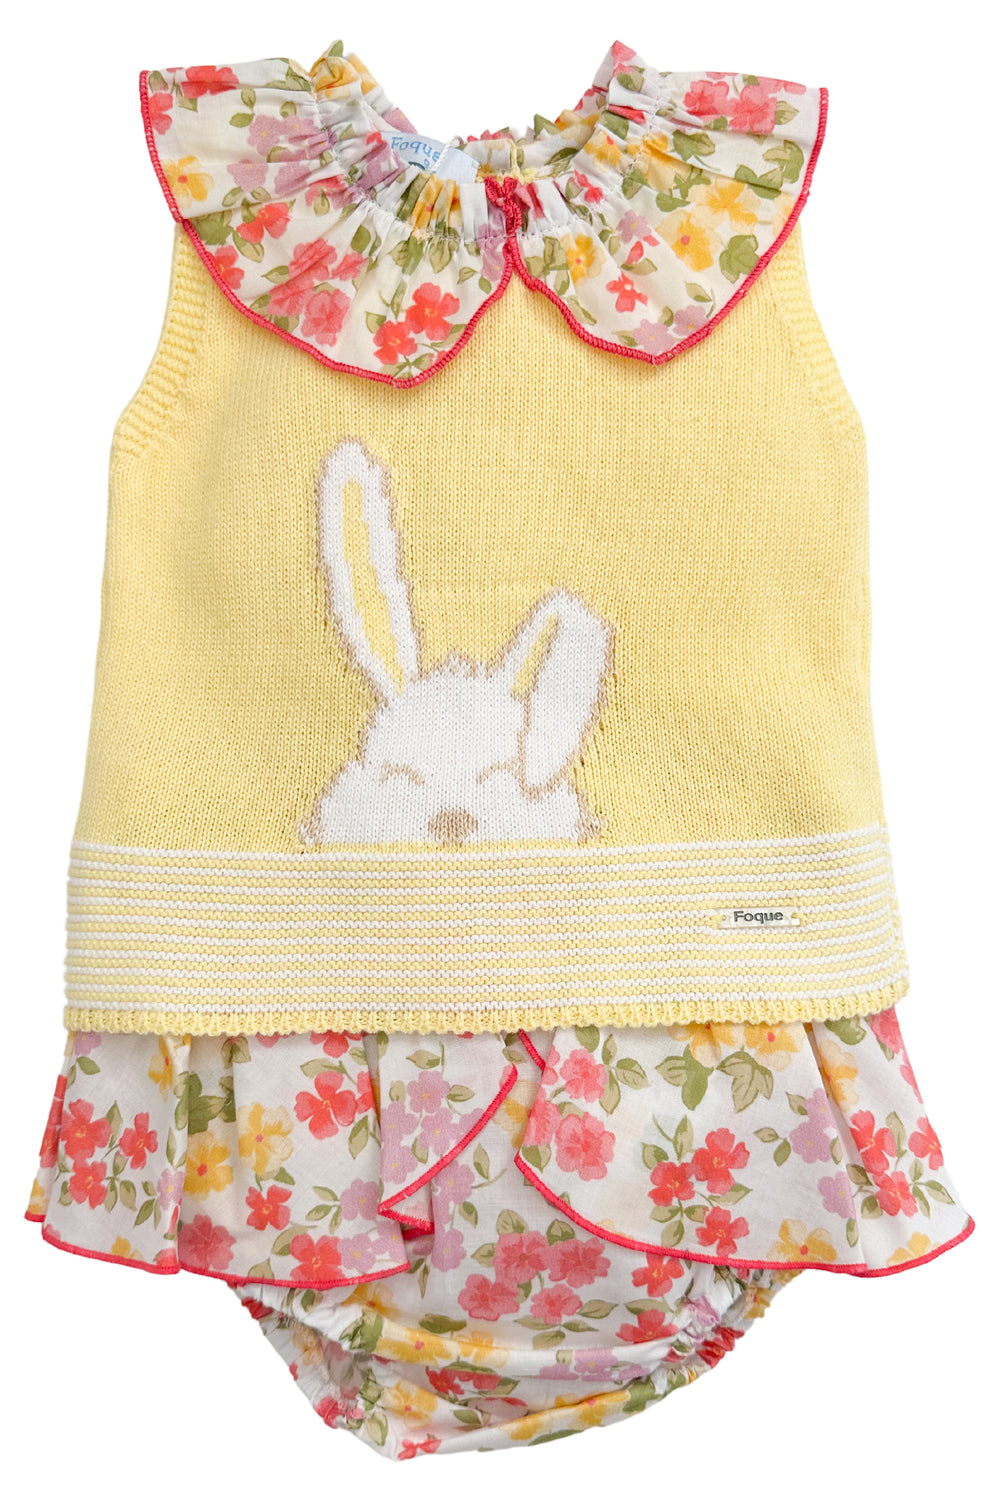 Foque PREORDER "Agnes" Lemon Knit Bunny Top & Bloomers | Millie and John